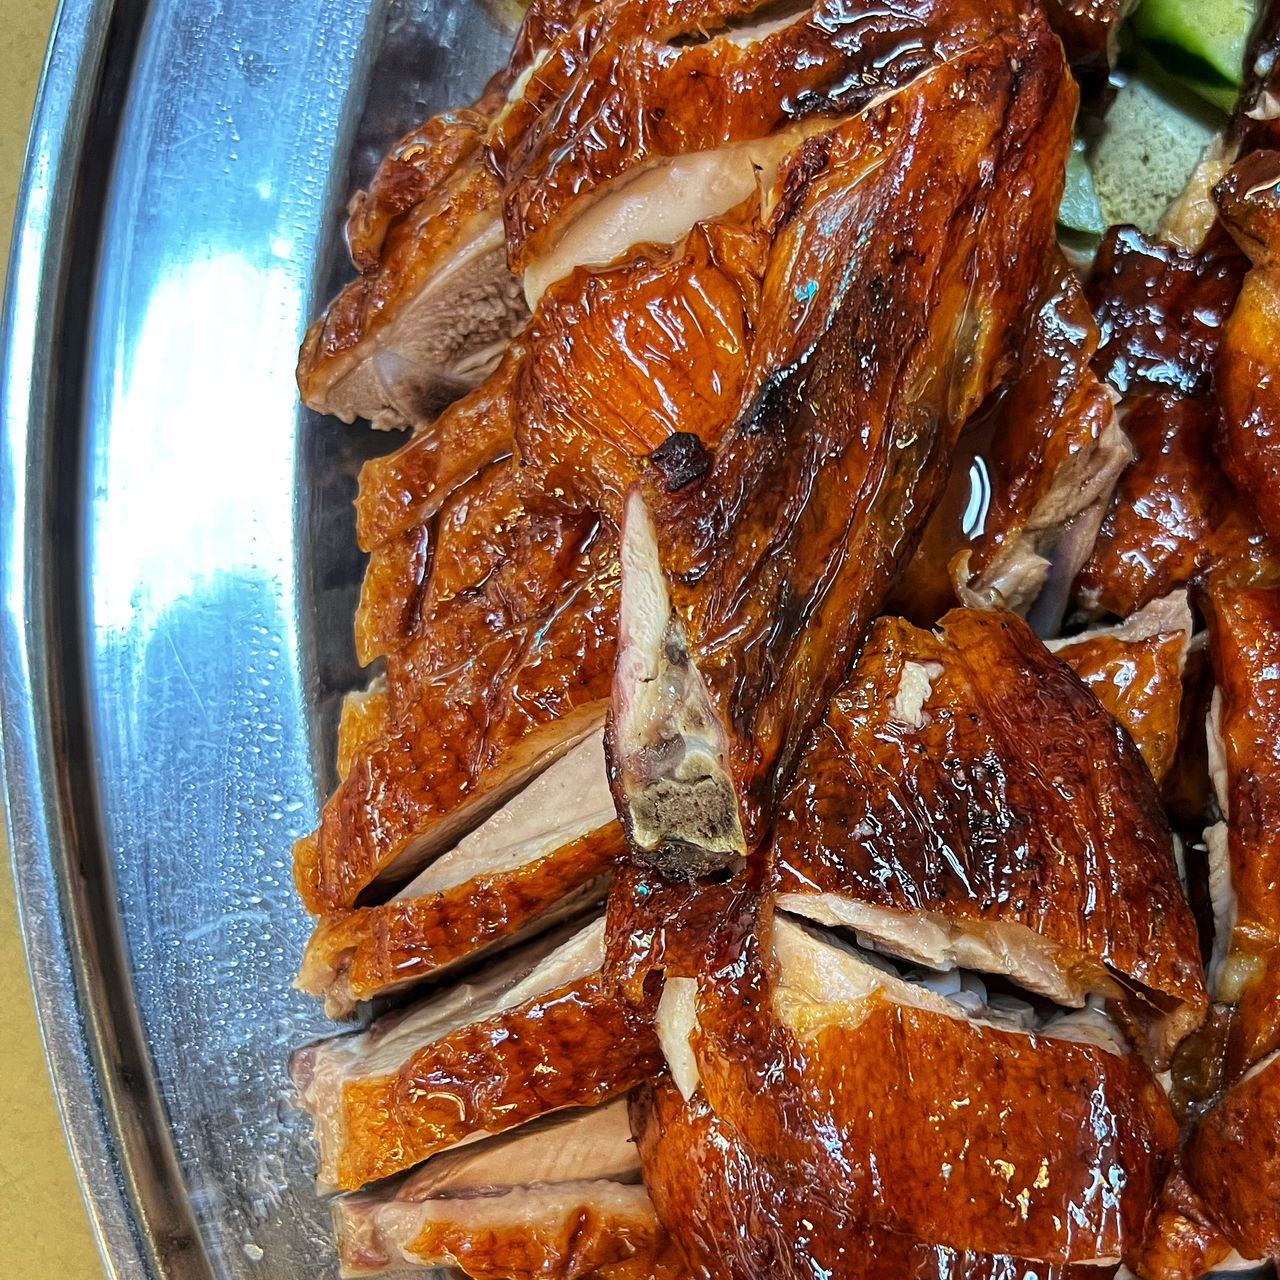 Chan Kee Roast Duck is Another Option